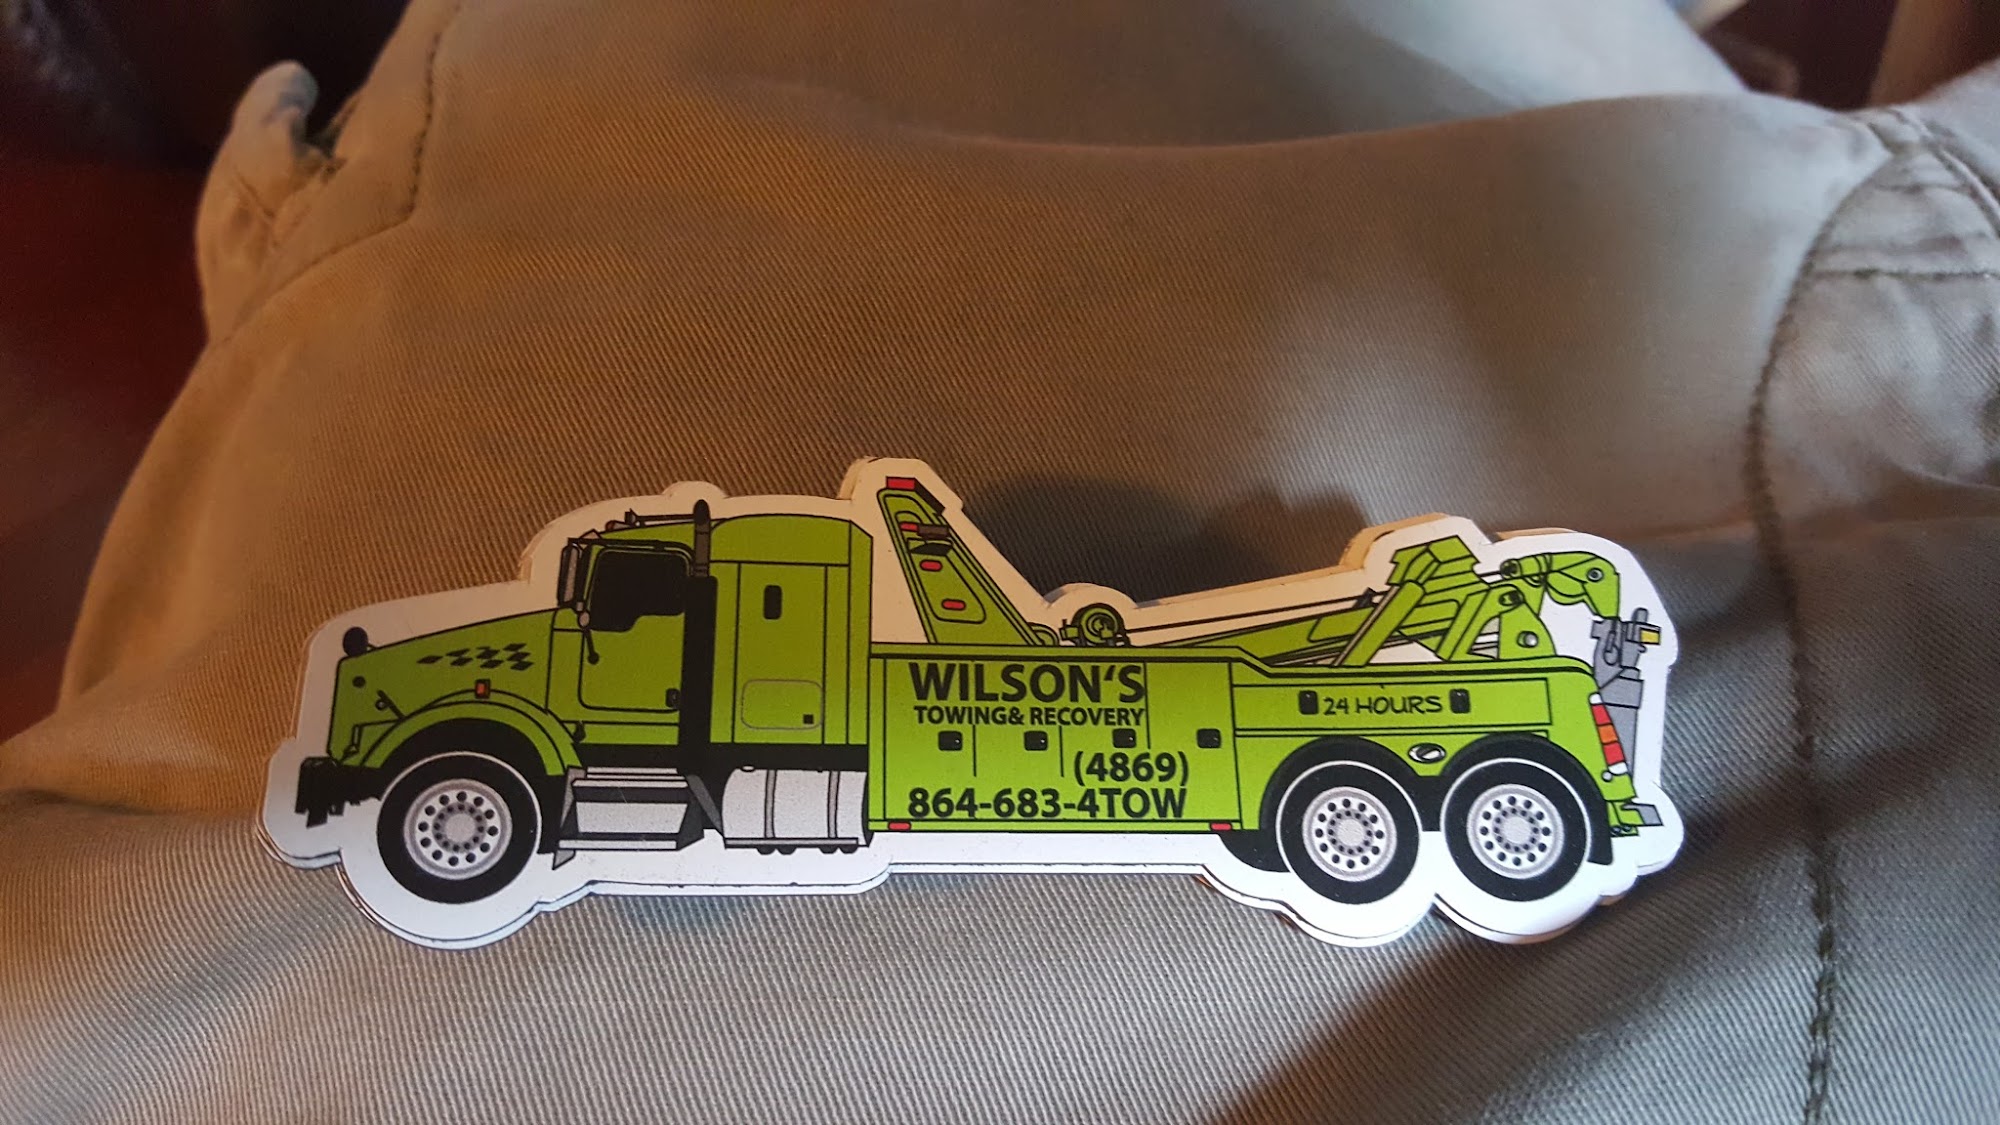 Wilson's Towing and Recovery LLC